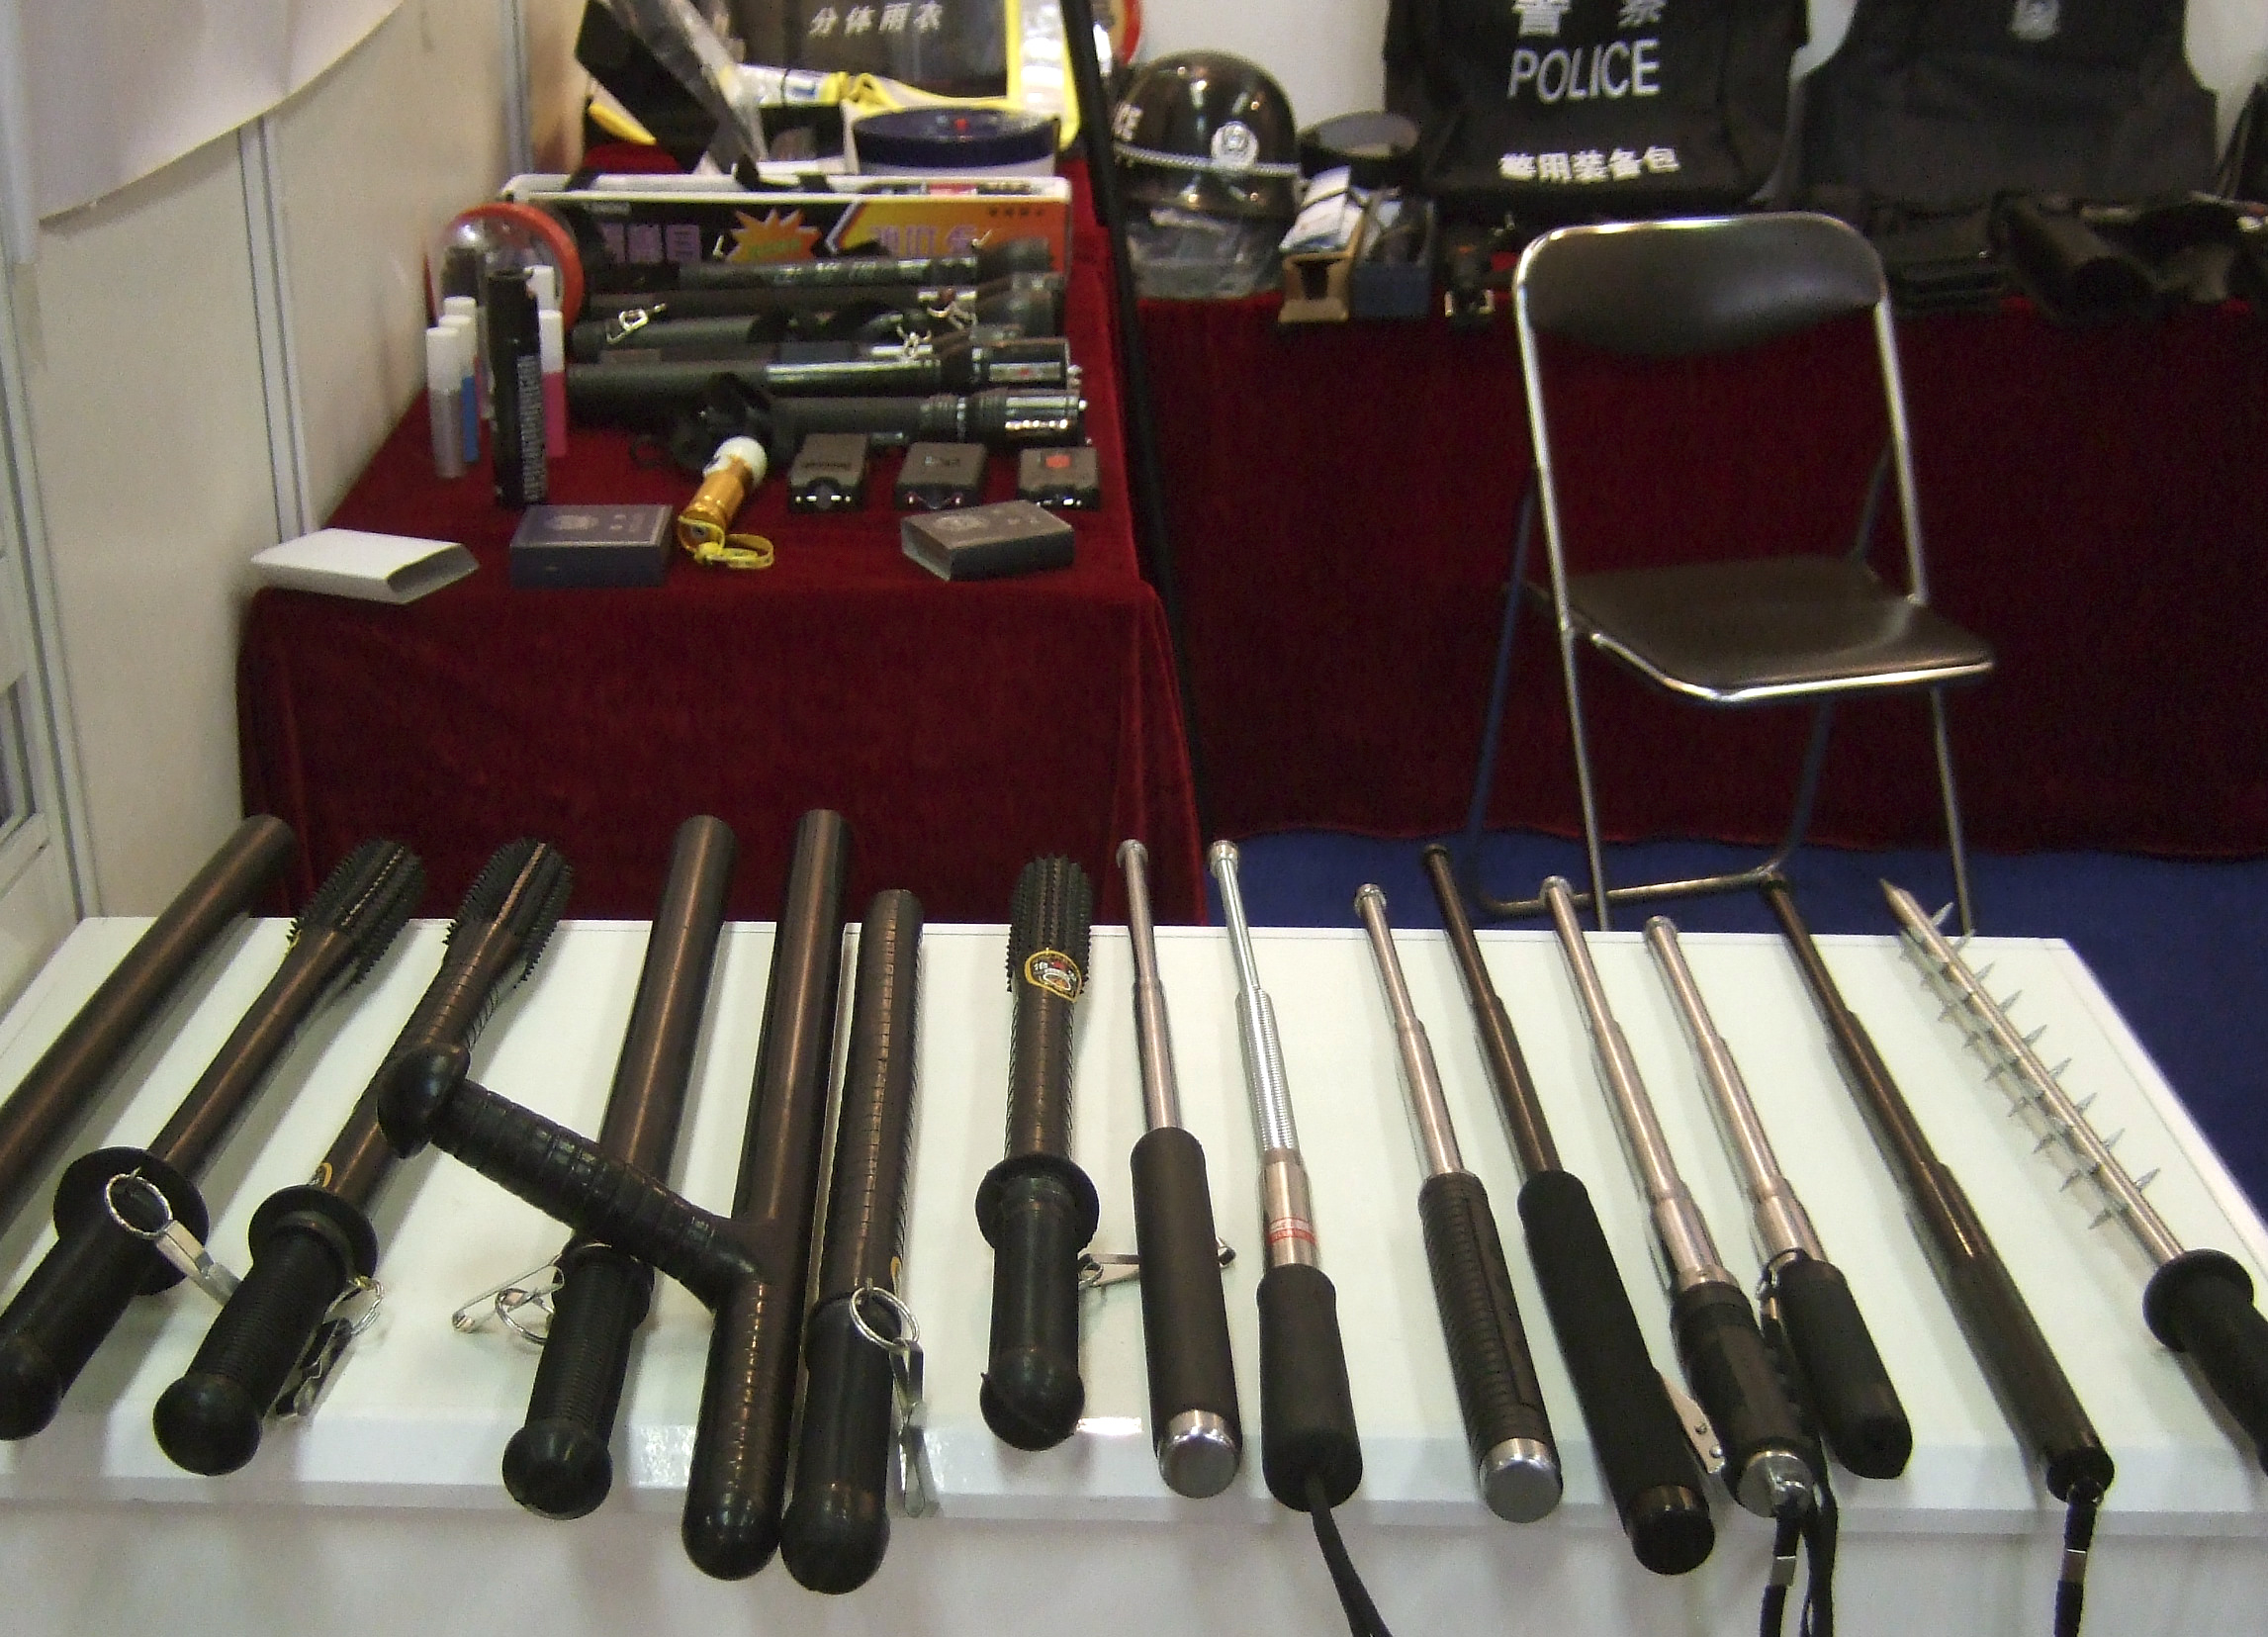 In this undated photo supplied by Amnesty International, side handled and telescopic batons and spike batons are displayed at a police equipment exhibition, at an undisclosed location. Chinese production and export of police equipment primarily used for torture, such as electric shock wands and neck-and-wrist cuffs connected by a chain, has grown dramatically, enabling human rights violations at home and abroad, Amnesty International said in a report Tuesday, Sept. 23, 2014. (AP Photo/Amnesty International)